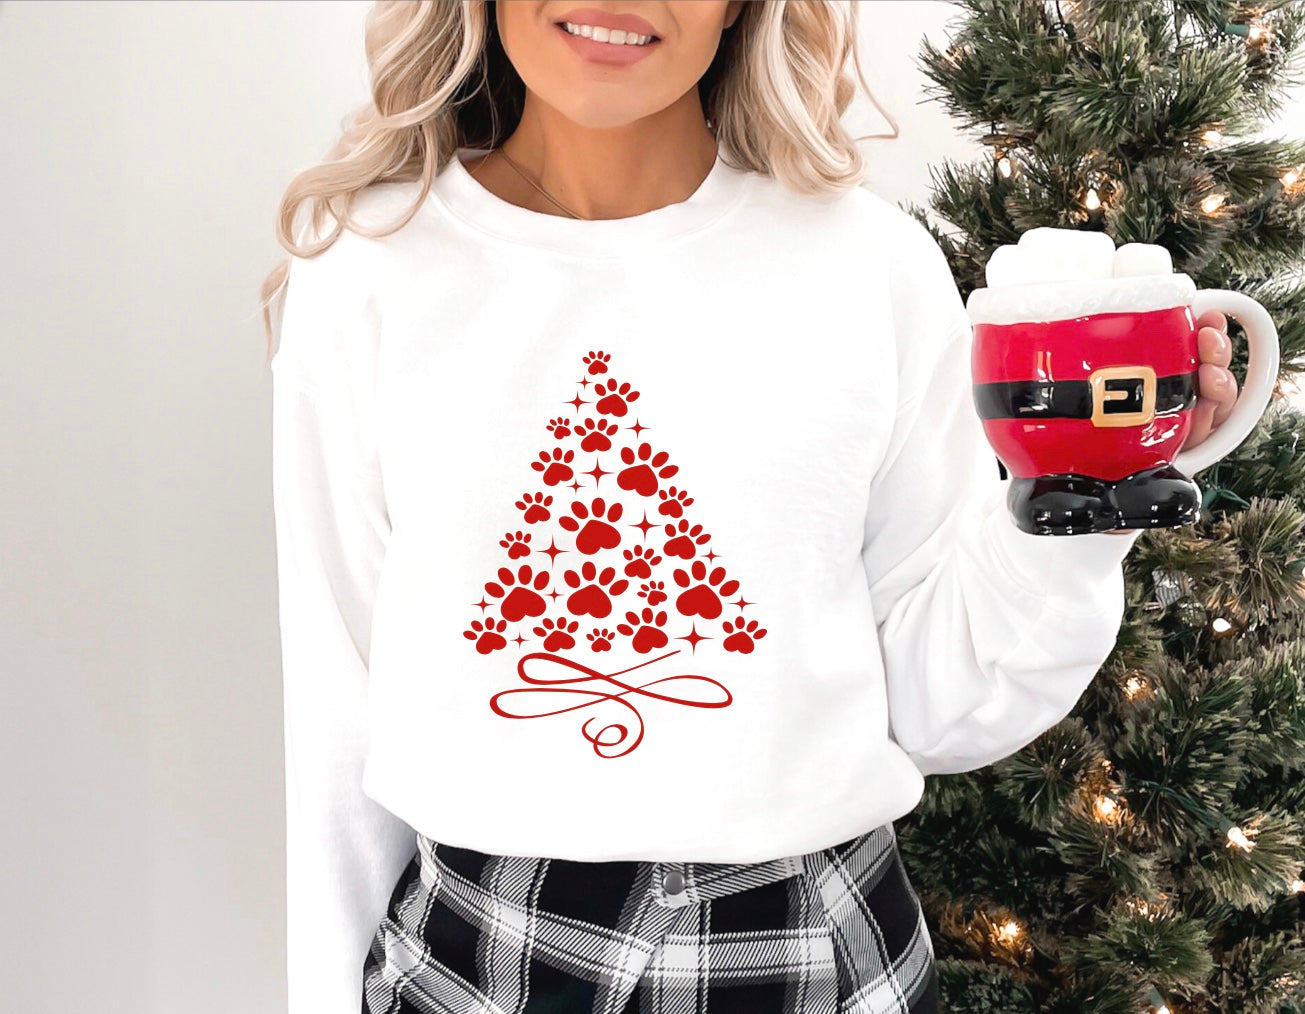 Paw print christmas tree graphic unisex crewneck sweatshirt in white with red graphic